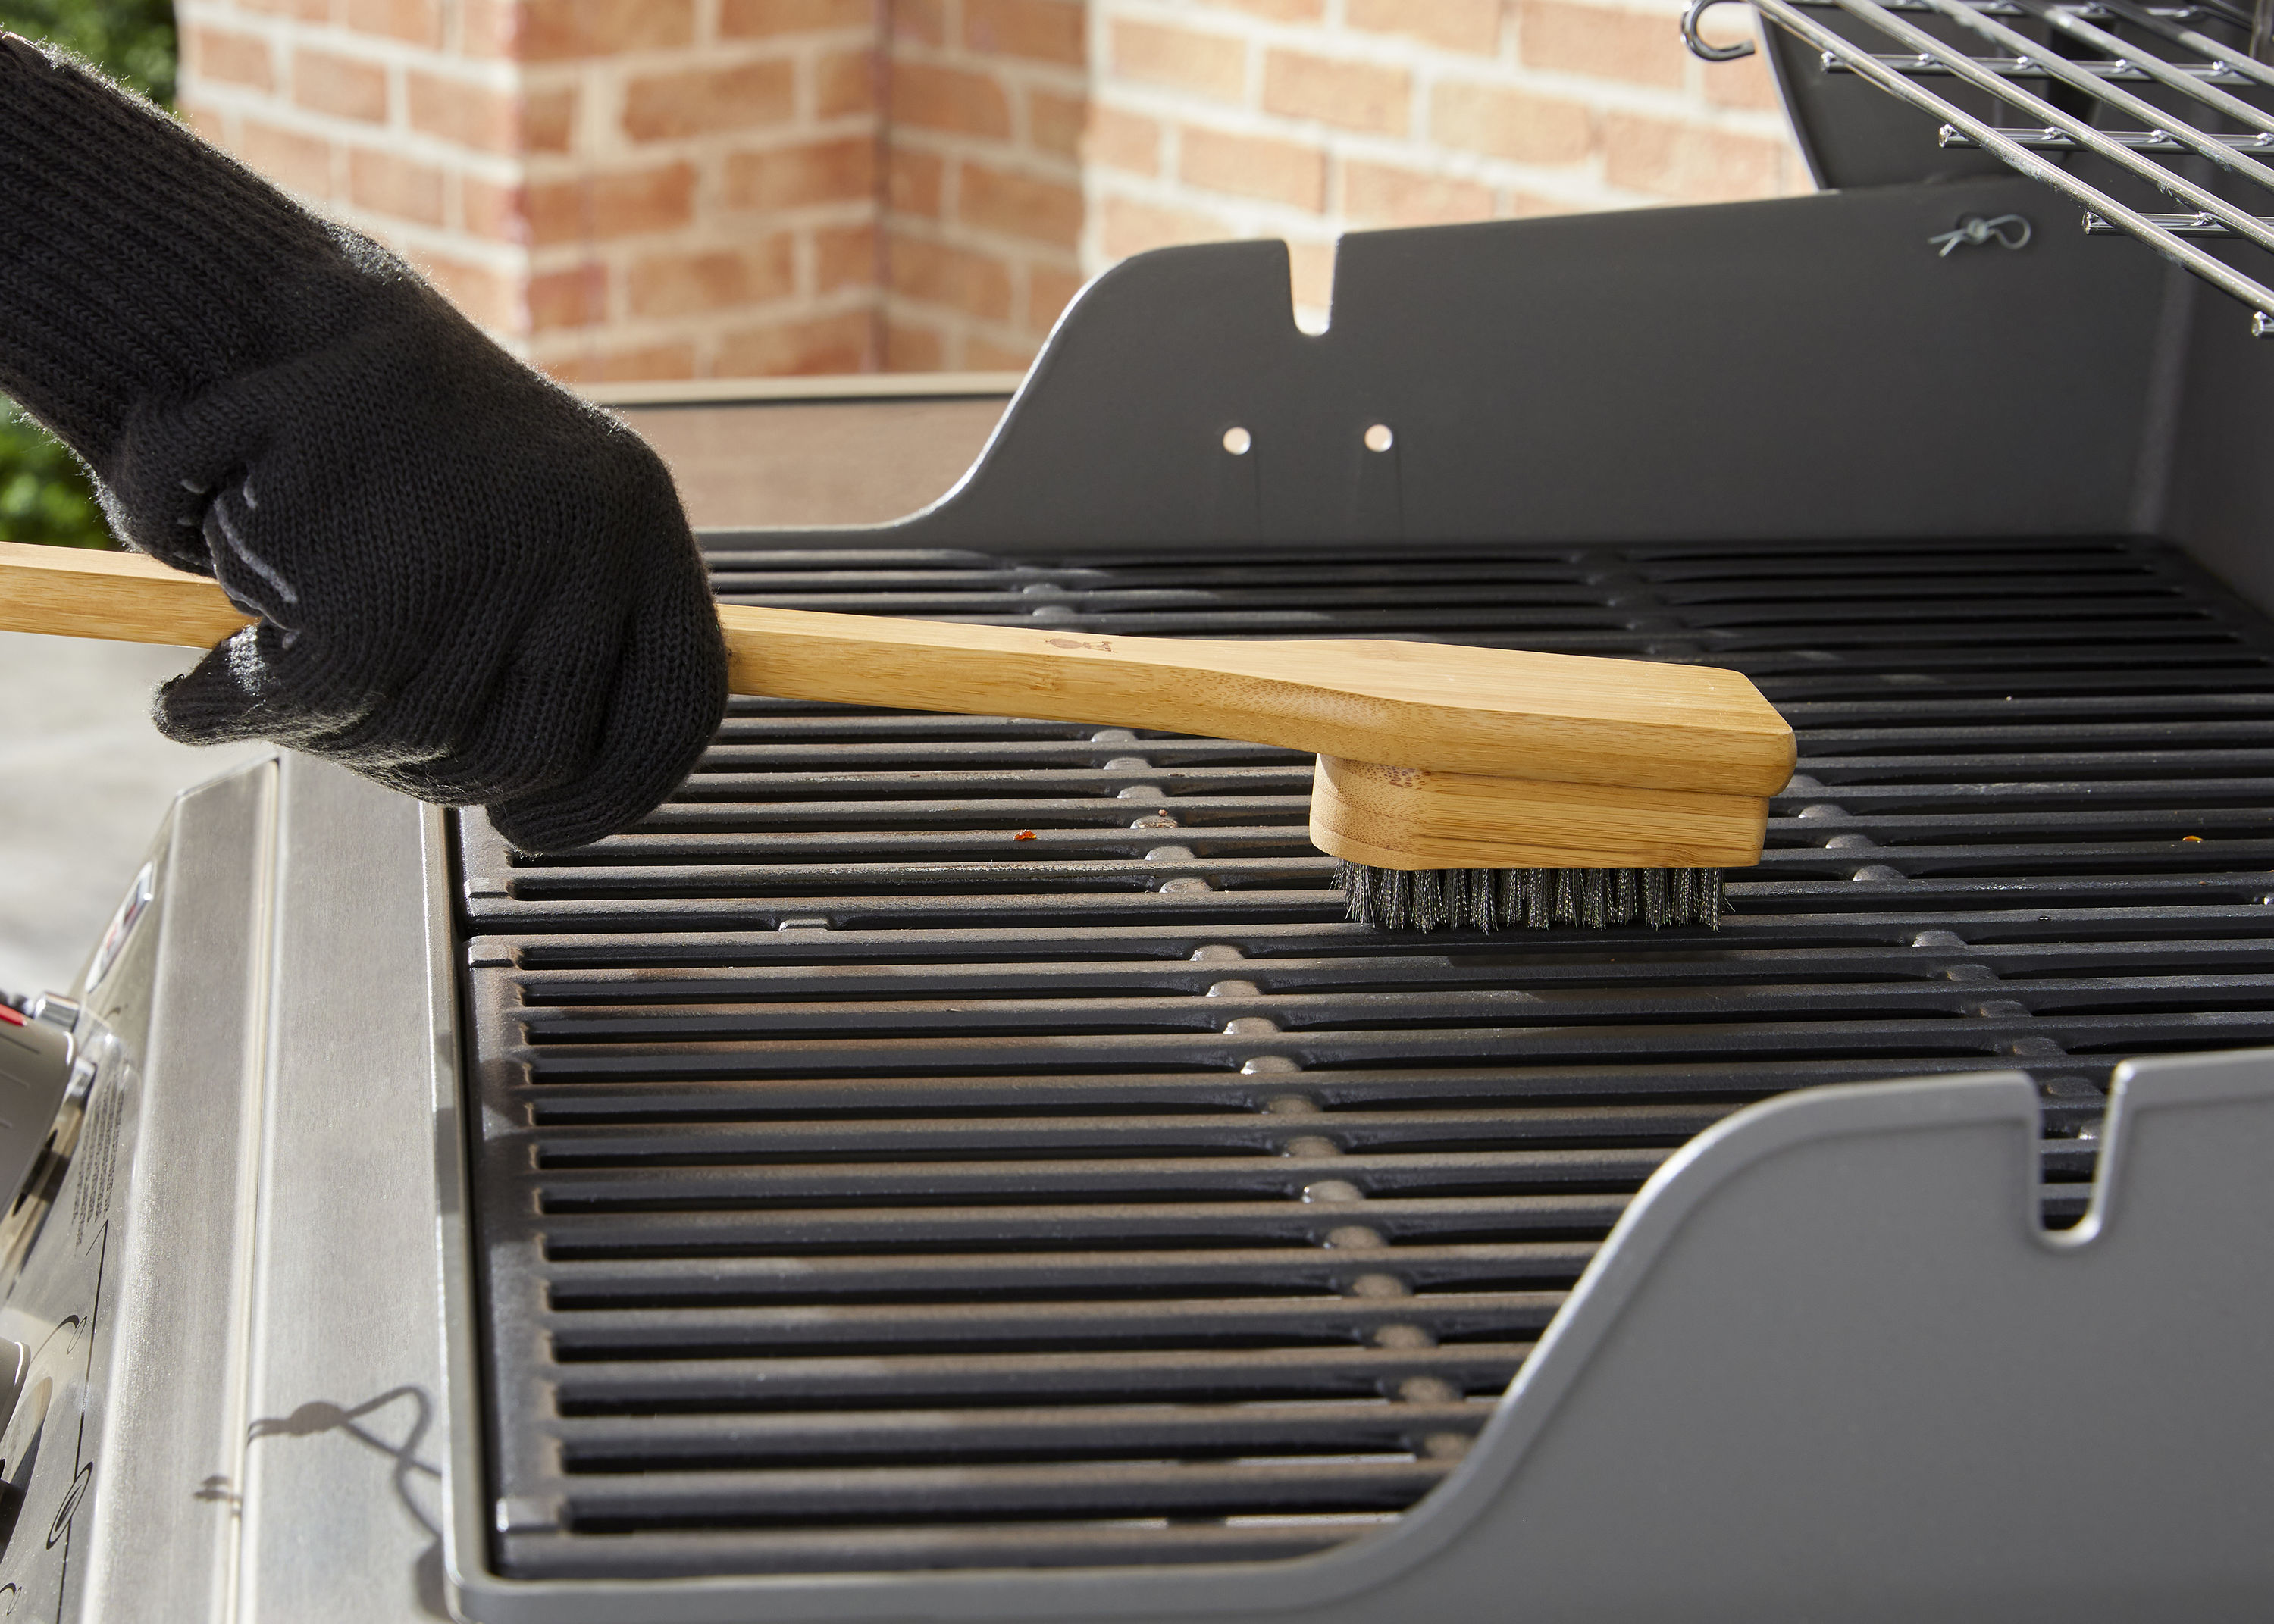 Weber Grill Cleaning Collection